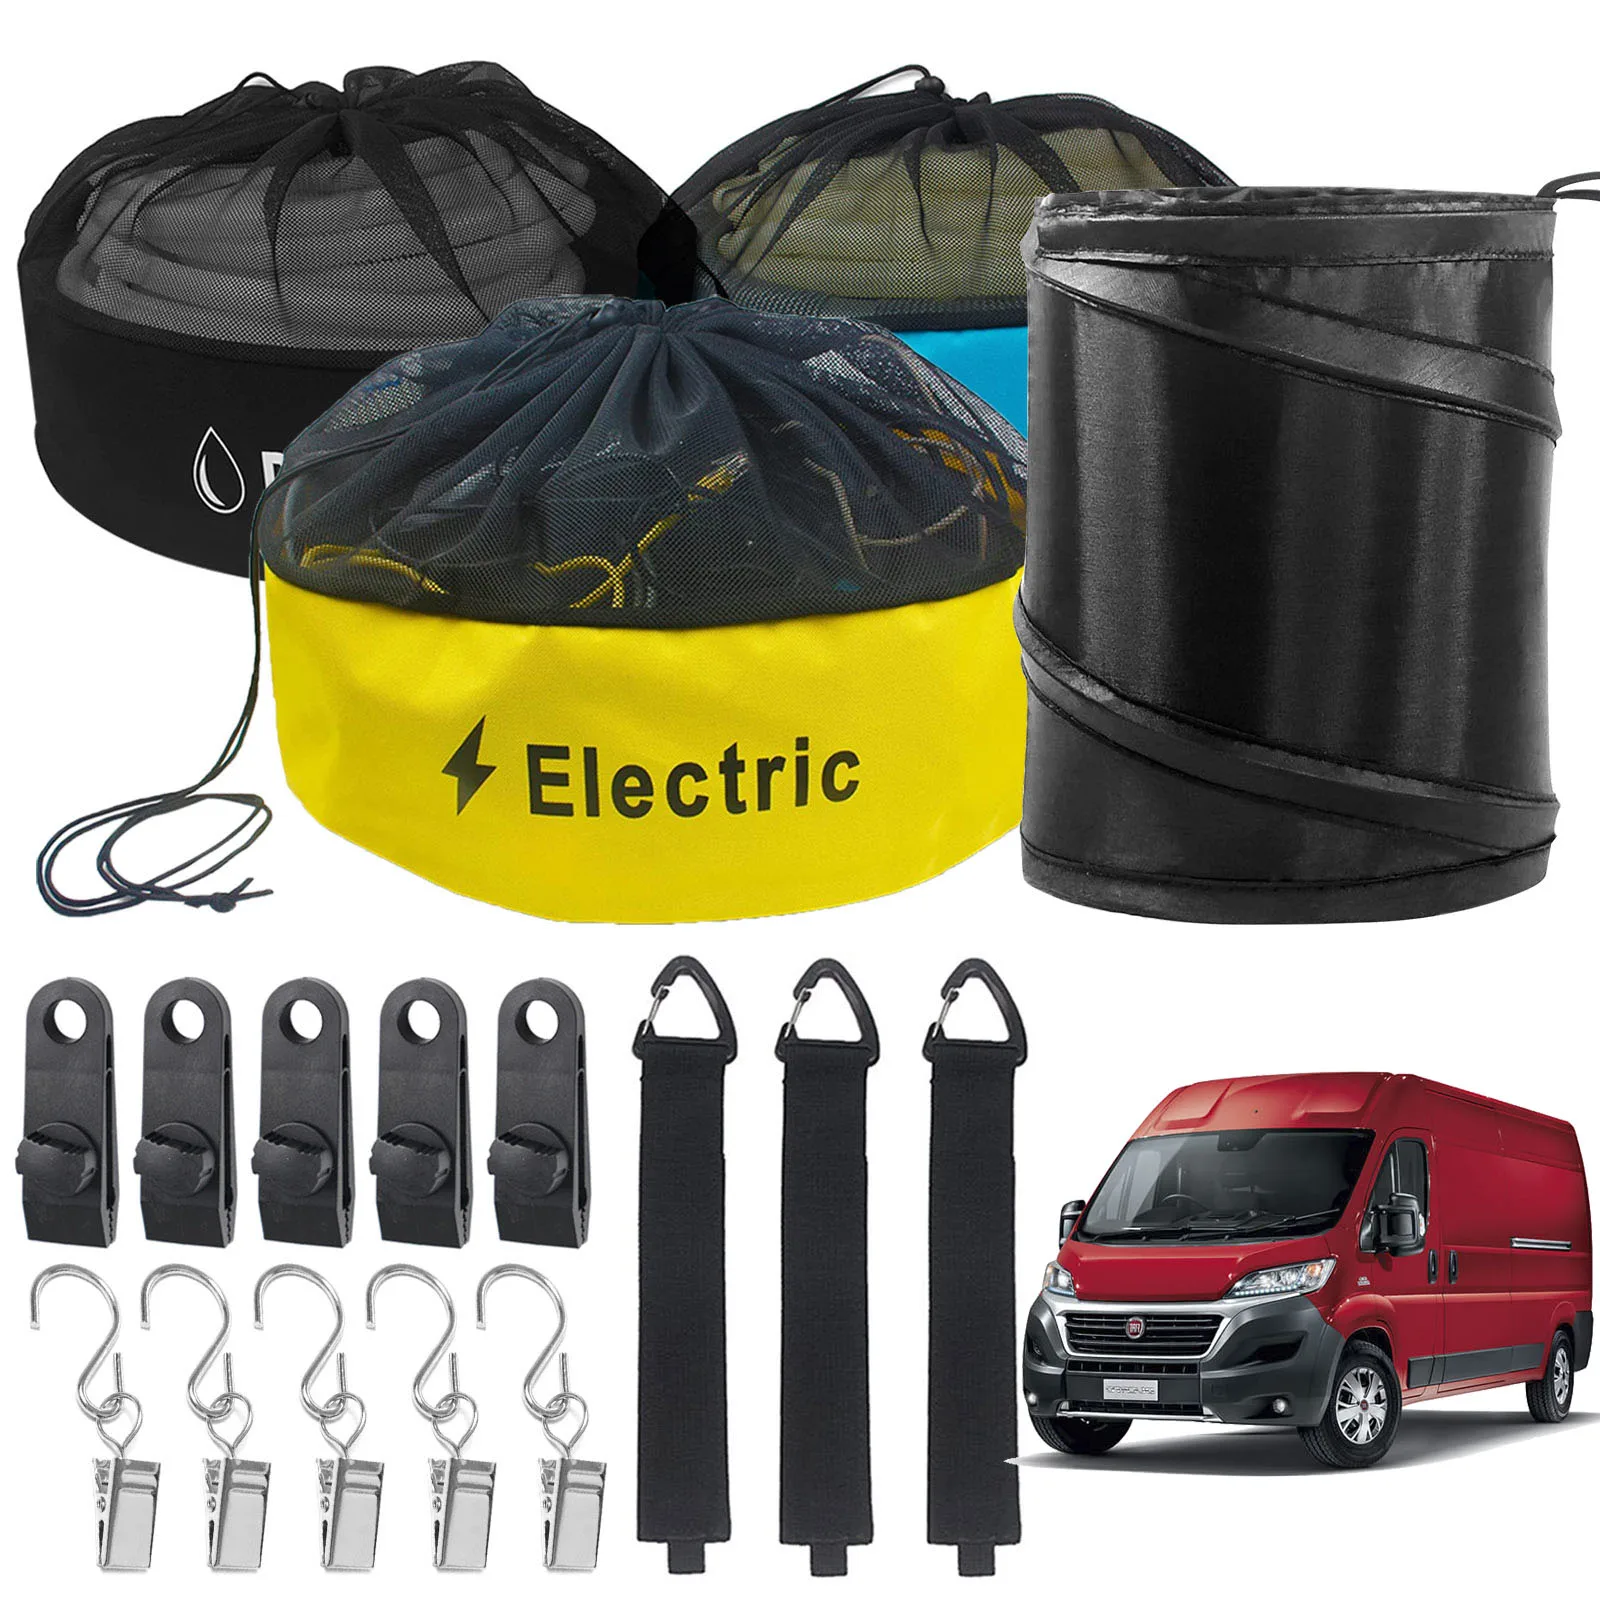 RV Hose Bags for Fiat Ducato 244 250 290 Camper Storage Sewer Fresh/Black Water Electrical Trash Can Motorhome Cleaning Tool Kit sanden 1822e 1875 1178 7v16 compressor for fiat ducato 2 3 3 0 multijet bus 7179600 504005418 71781791 504384357 71721759 717247